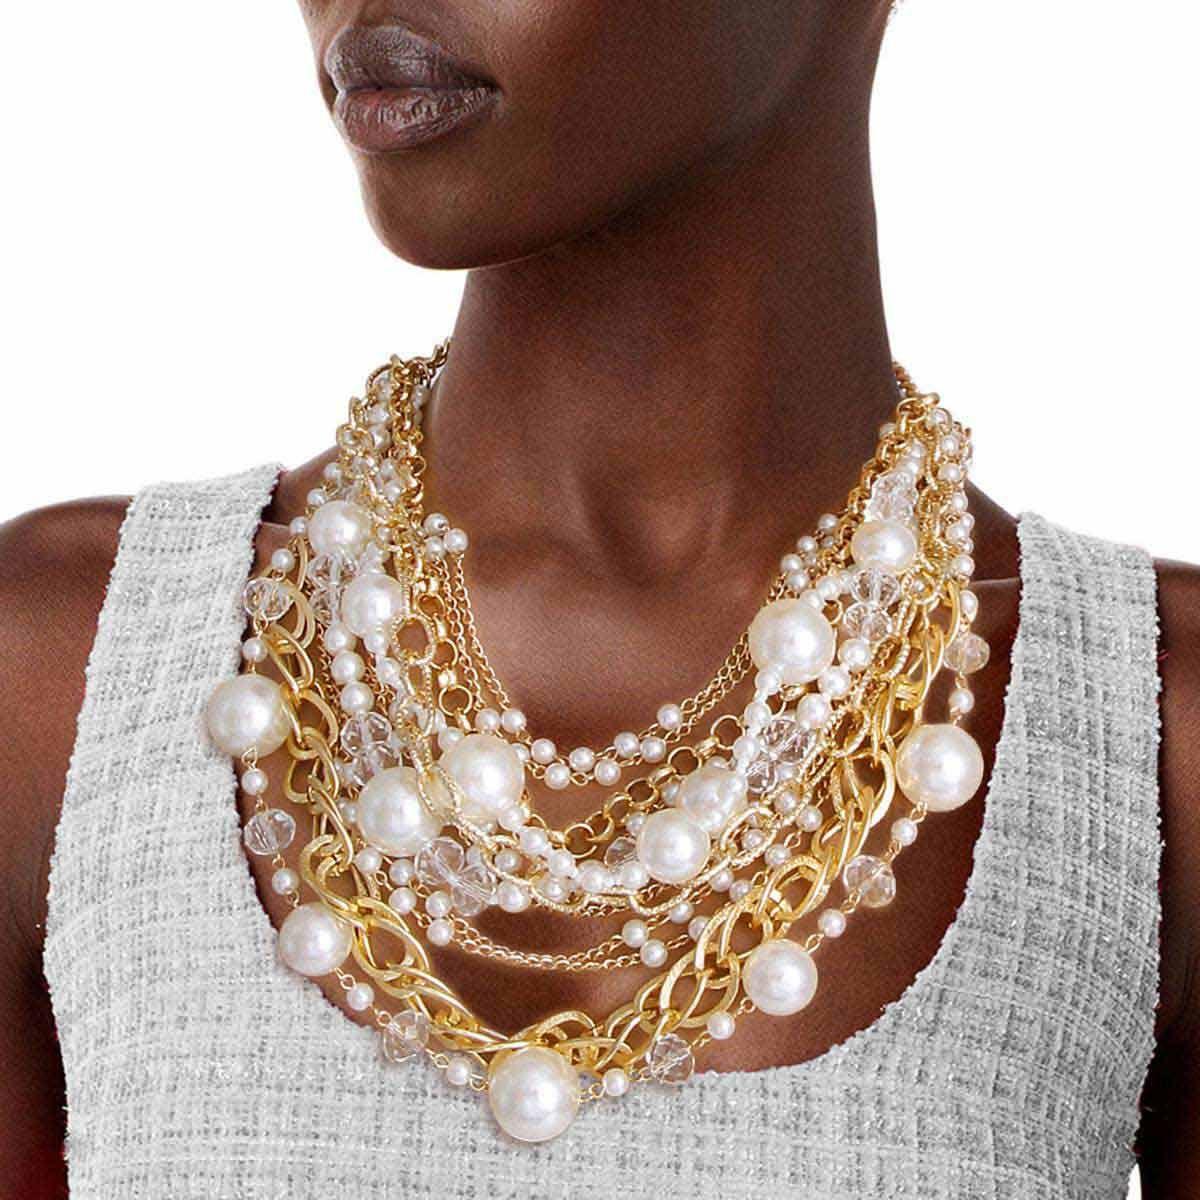 Must-Have Layered Necklace: Gold Chains, Cream Pearls & Clear Beads